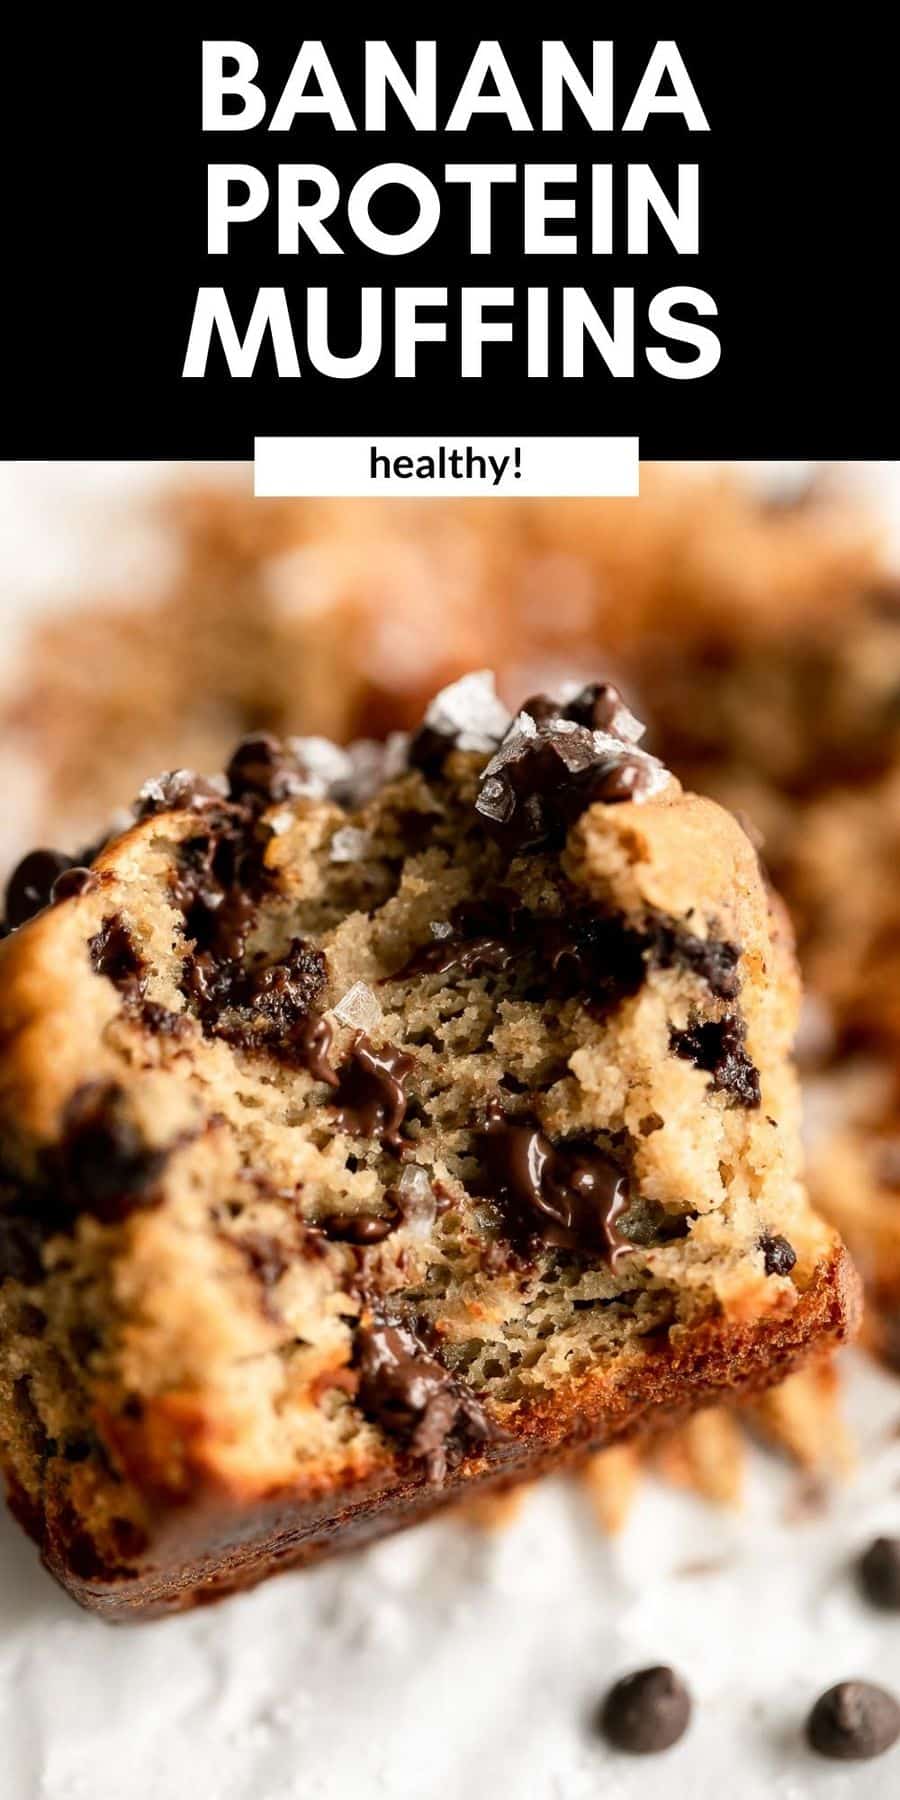 Banana Protein Muffins - Eat With Clarity